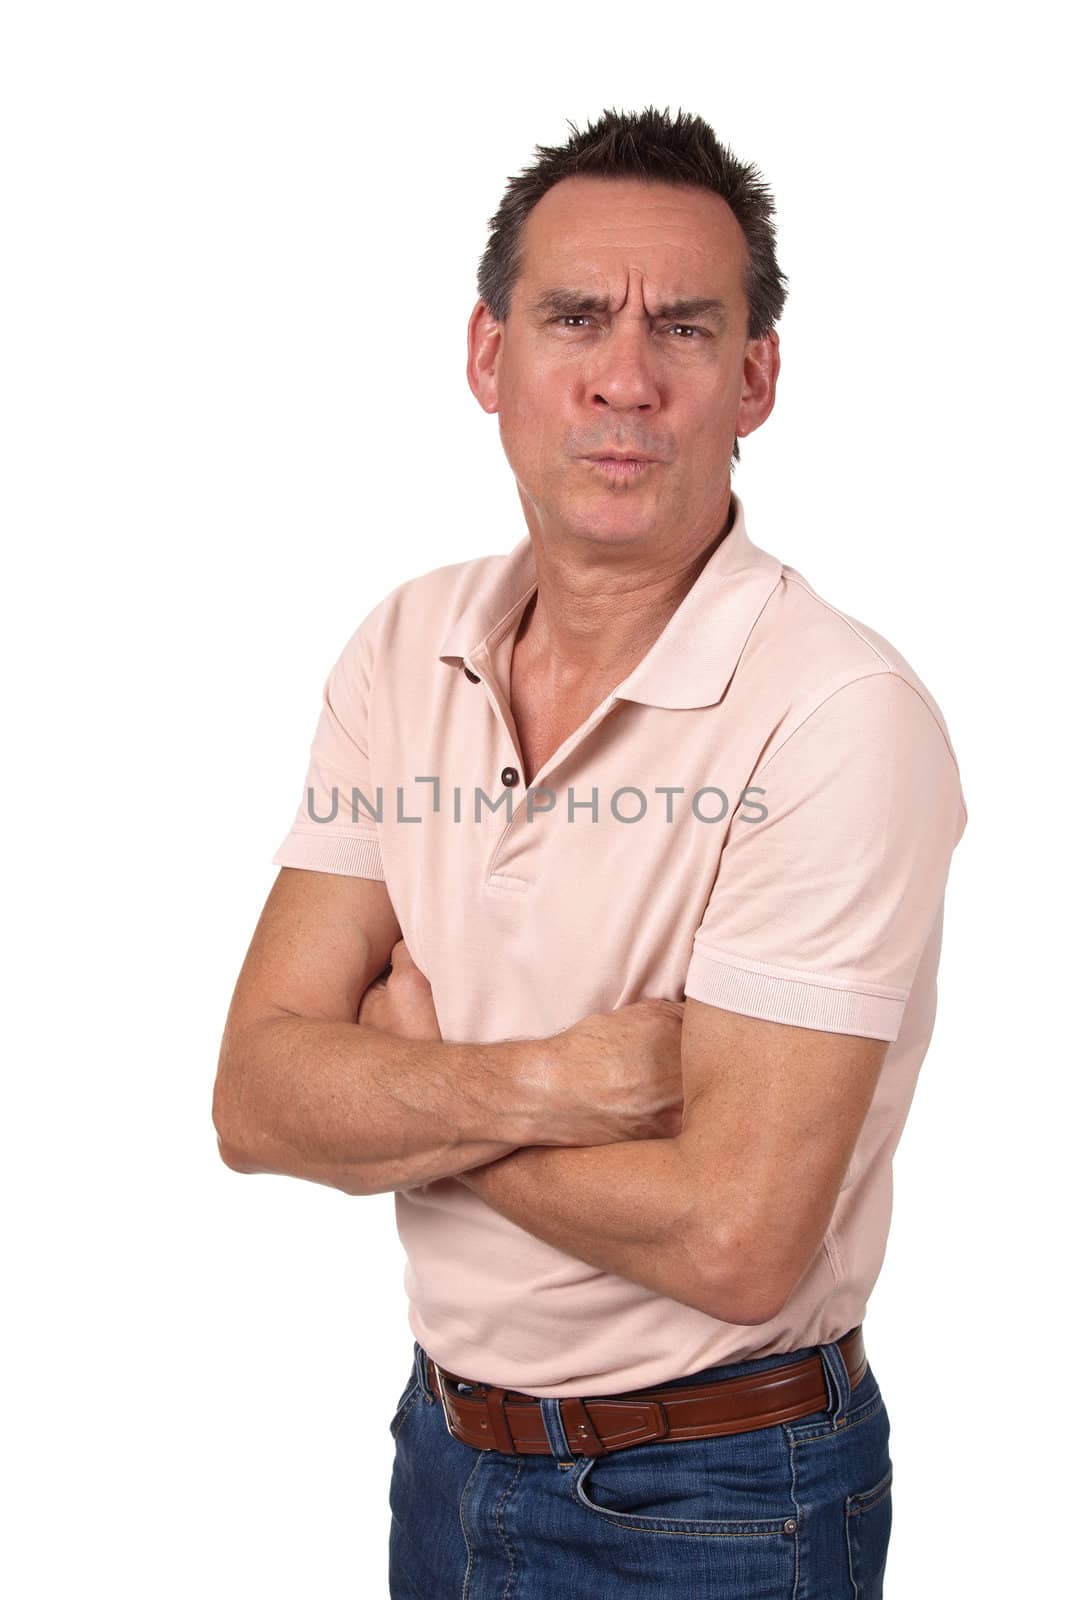 Attractive Middle Age Man Making Funny Silly Ooh Face Isolated